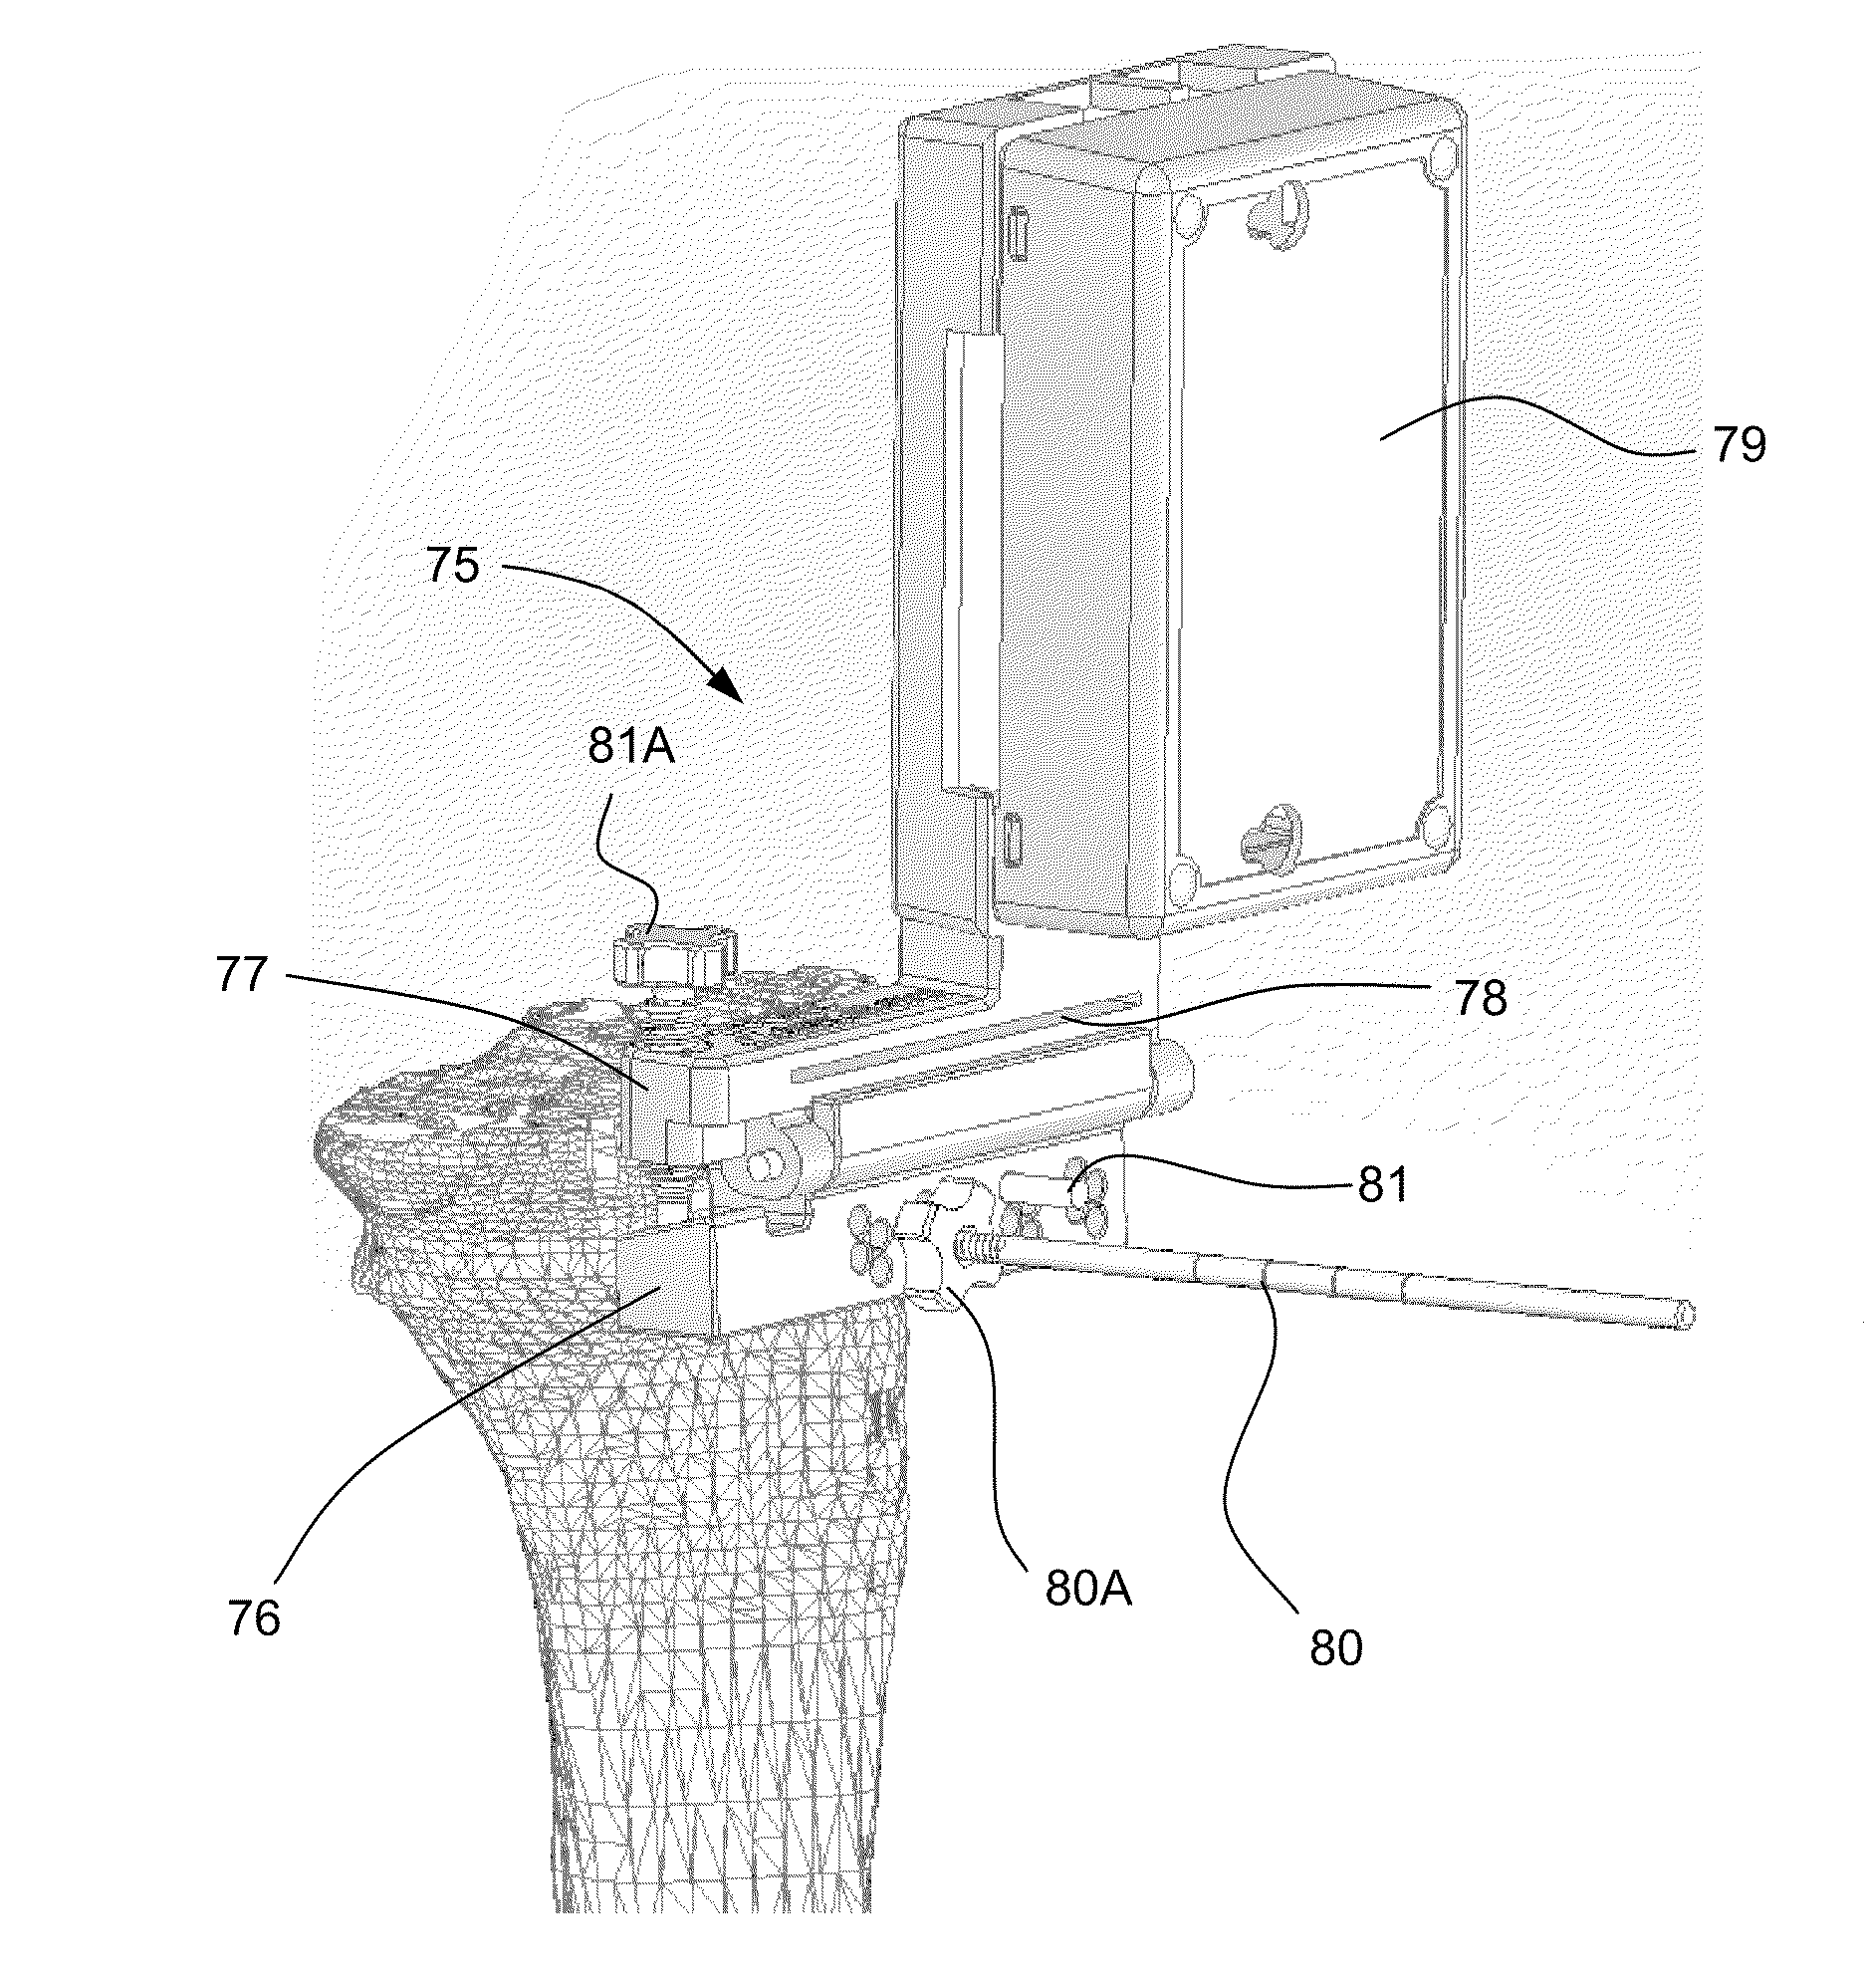 Method and system for planning/guiding alterations to a bone